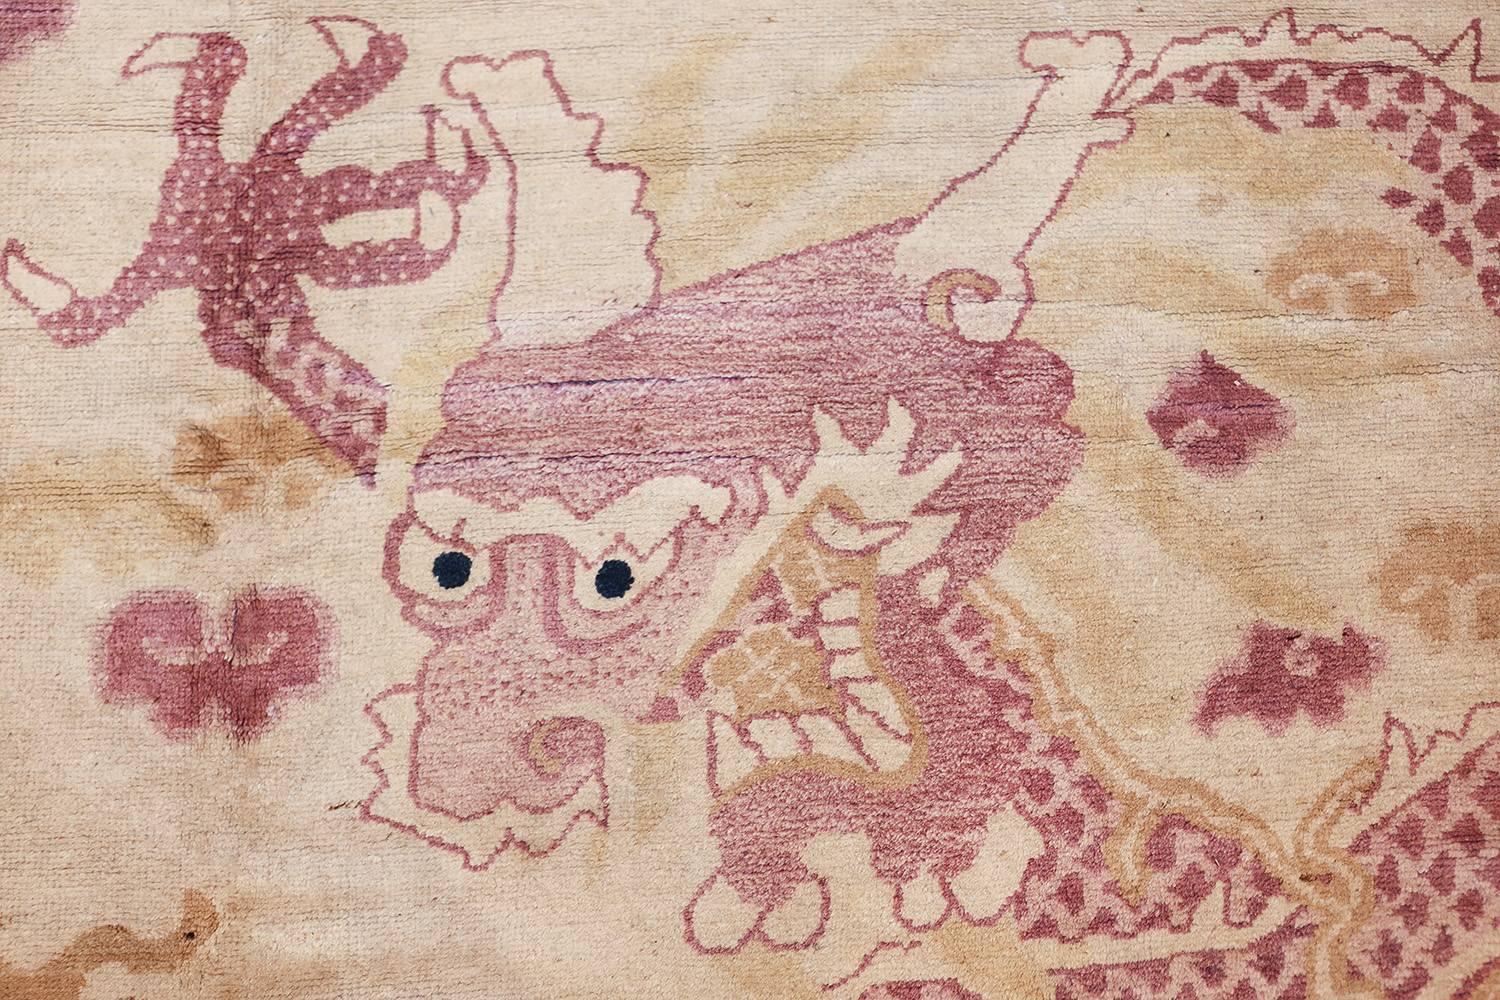 20th Century Funky Antique Purple Chinese Dragon Design Rug. Size: 11 ft x 14 ft